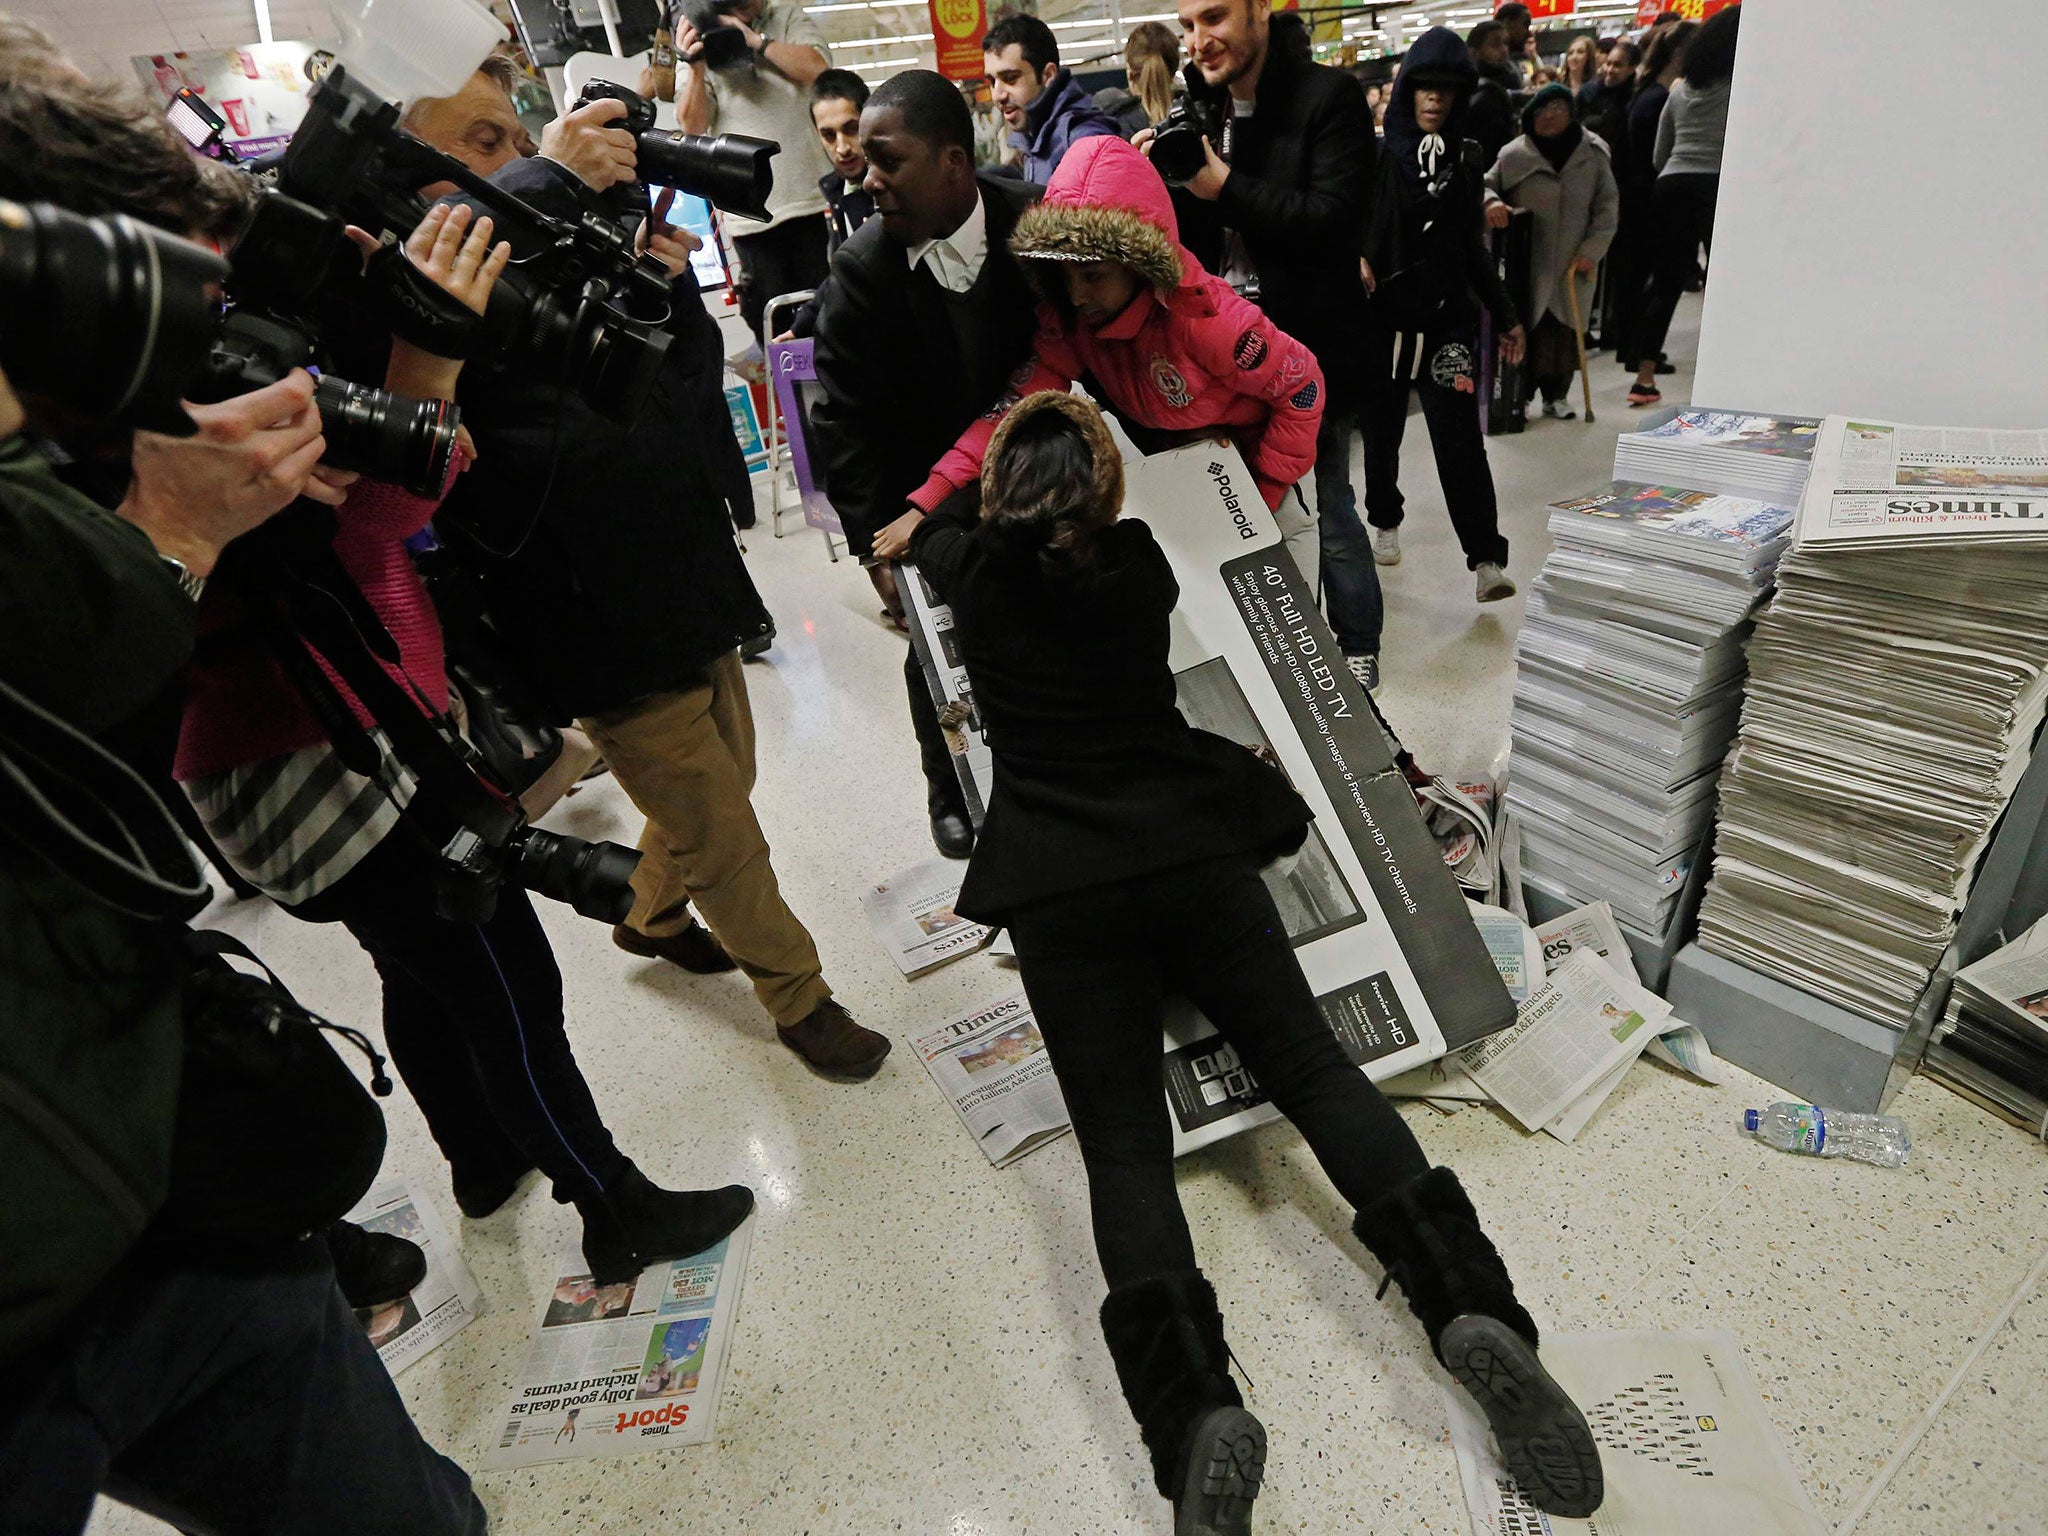 Shoppers wrestle over a television at an Asda superstore in Wembley